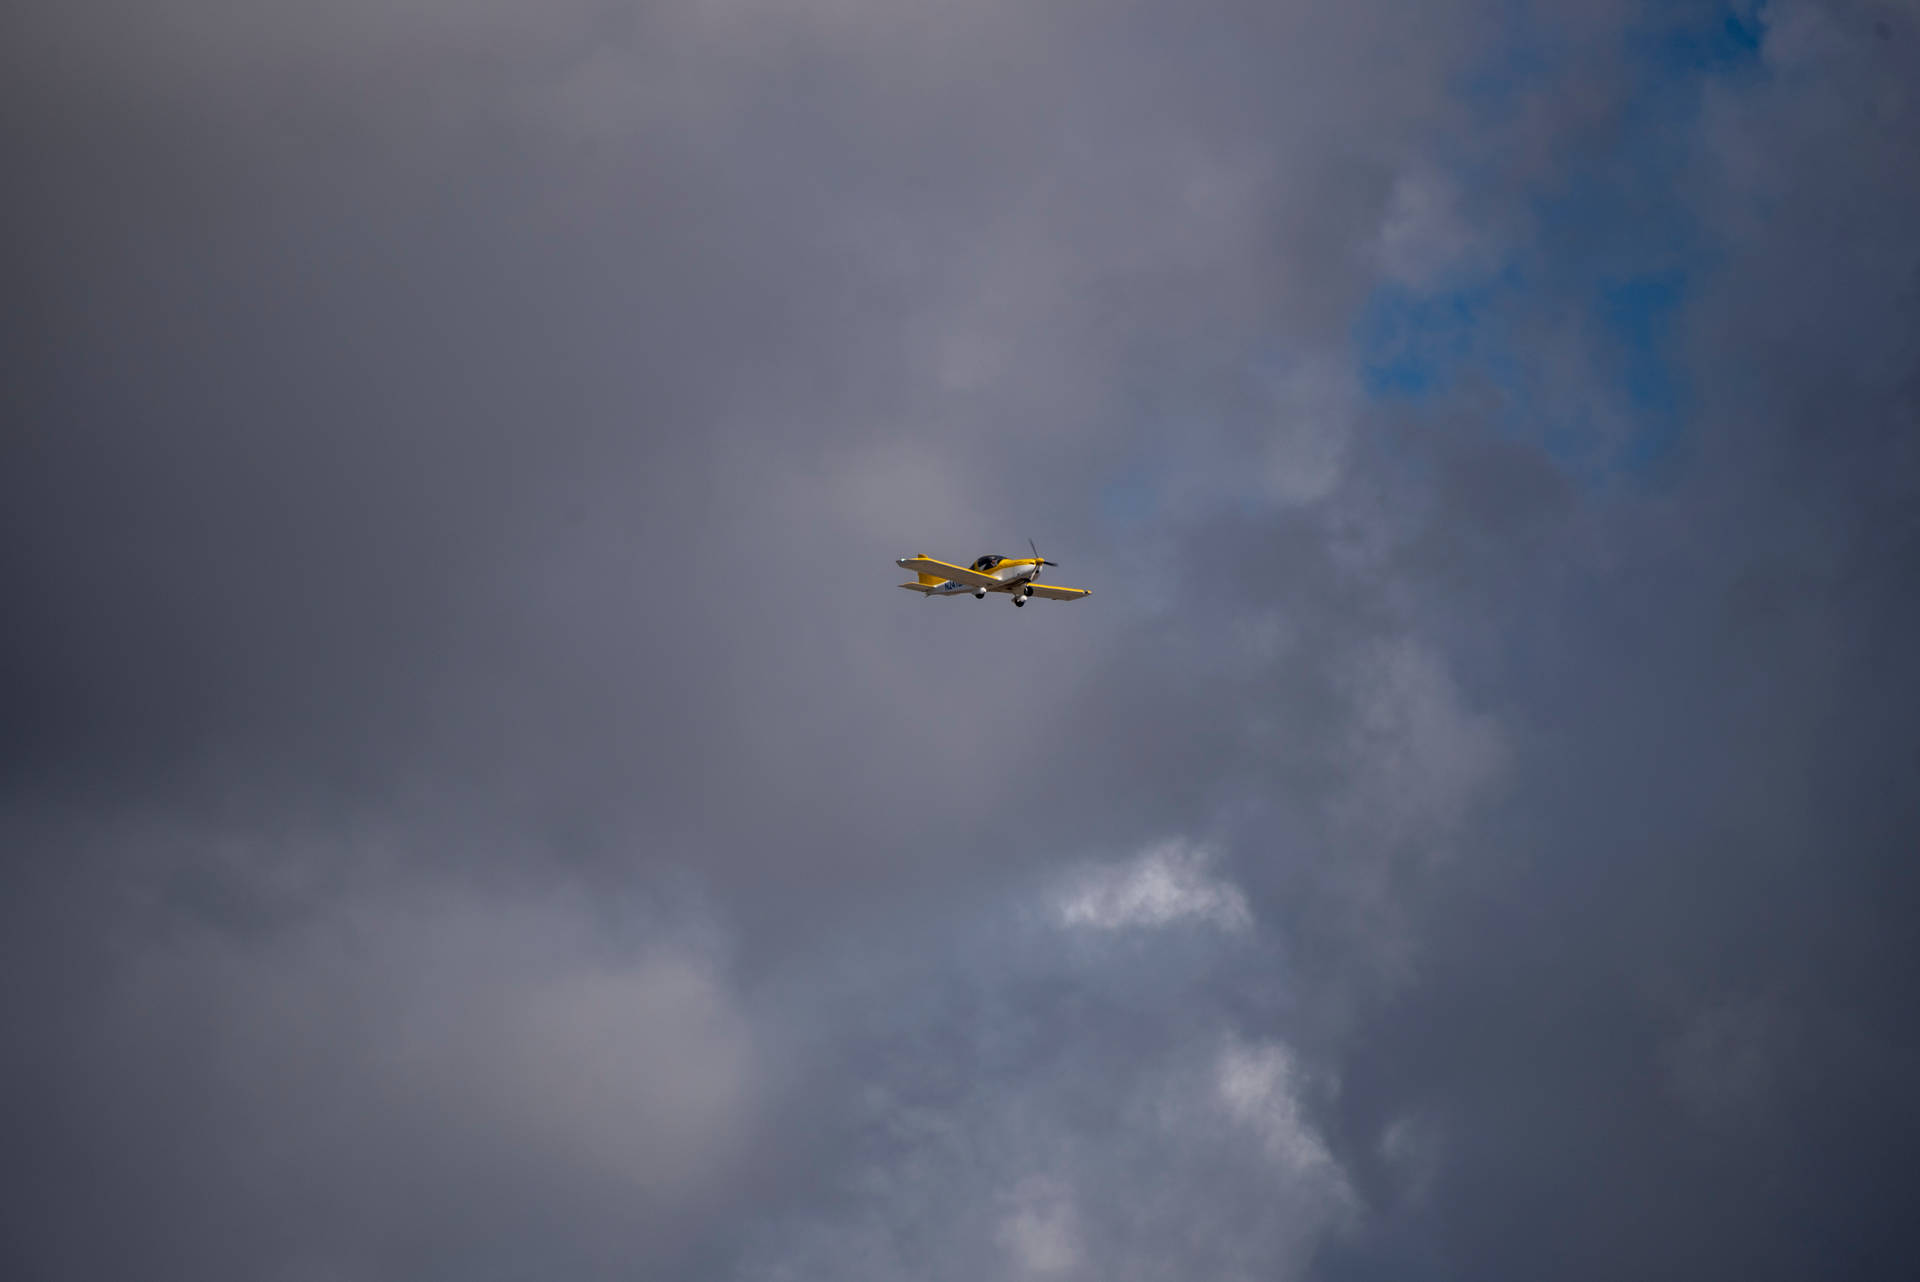 Freedom In The Sky: Small Yellow Plane Soaring High Background